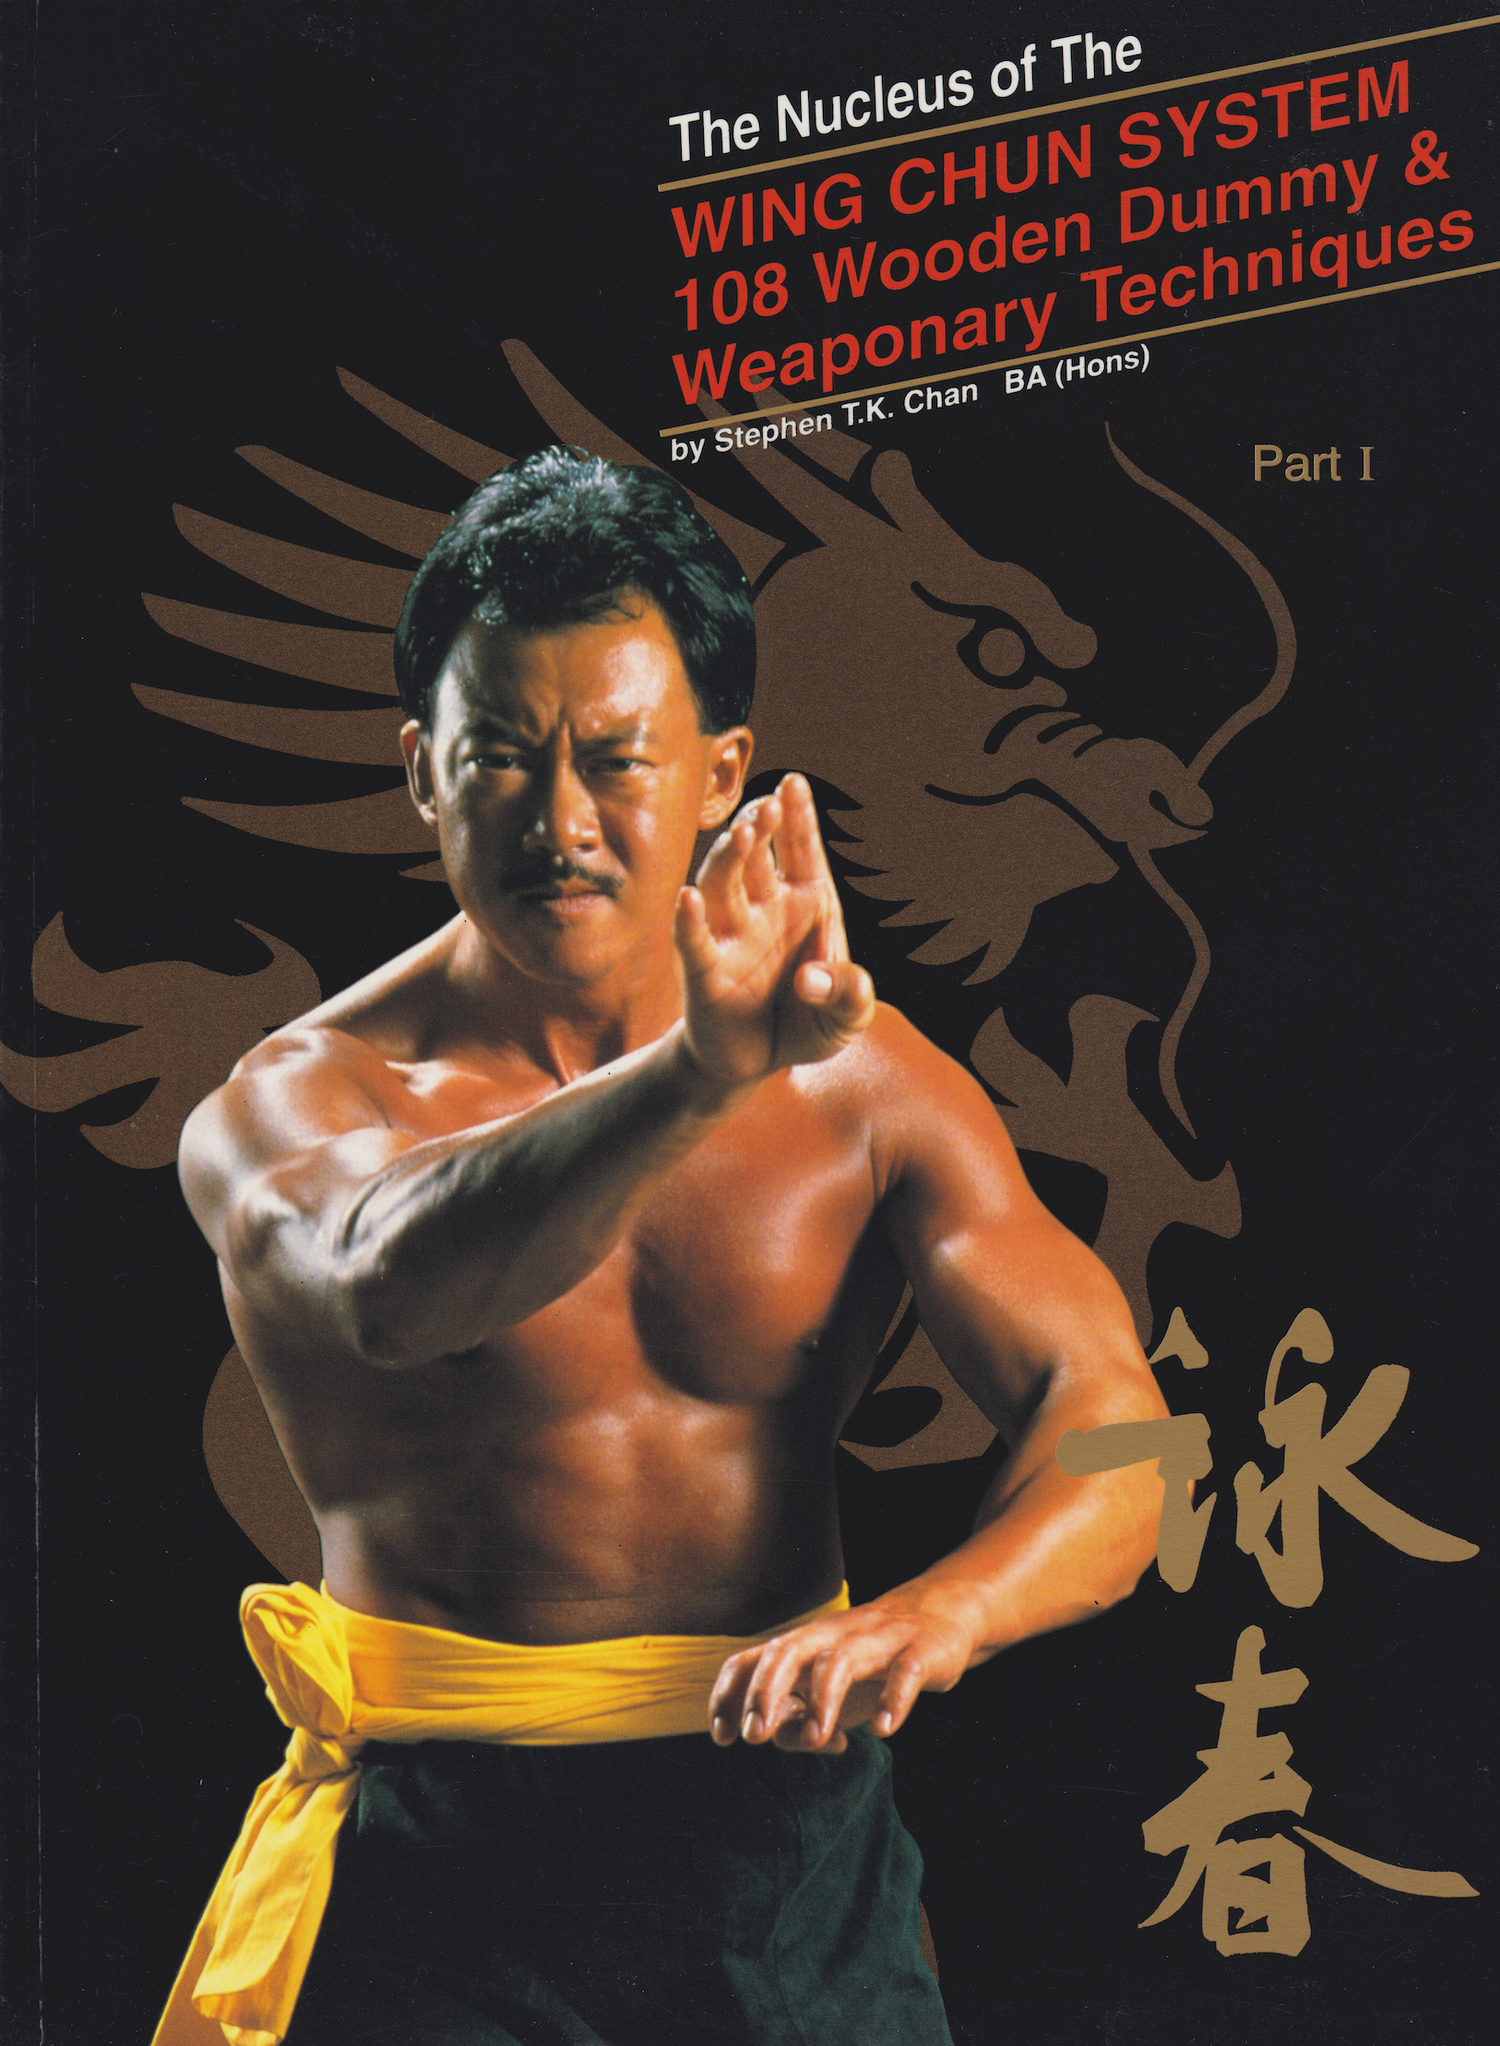 The Nucleus of the Wing Chun System: 108 Wooden Dummy & Weapons Book 1 by Stephan Chan